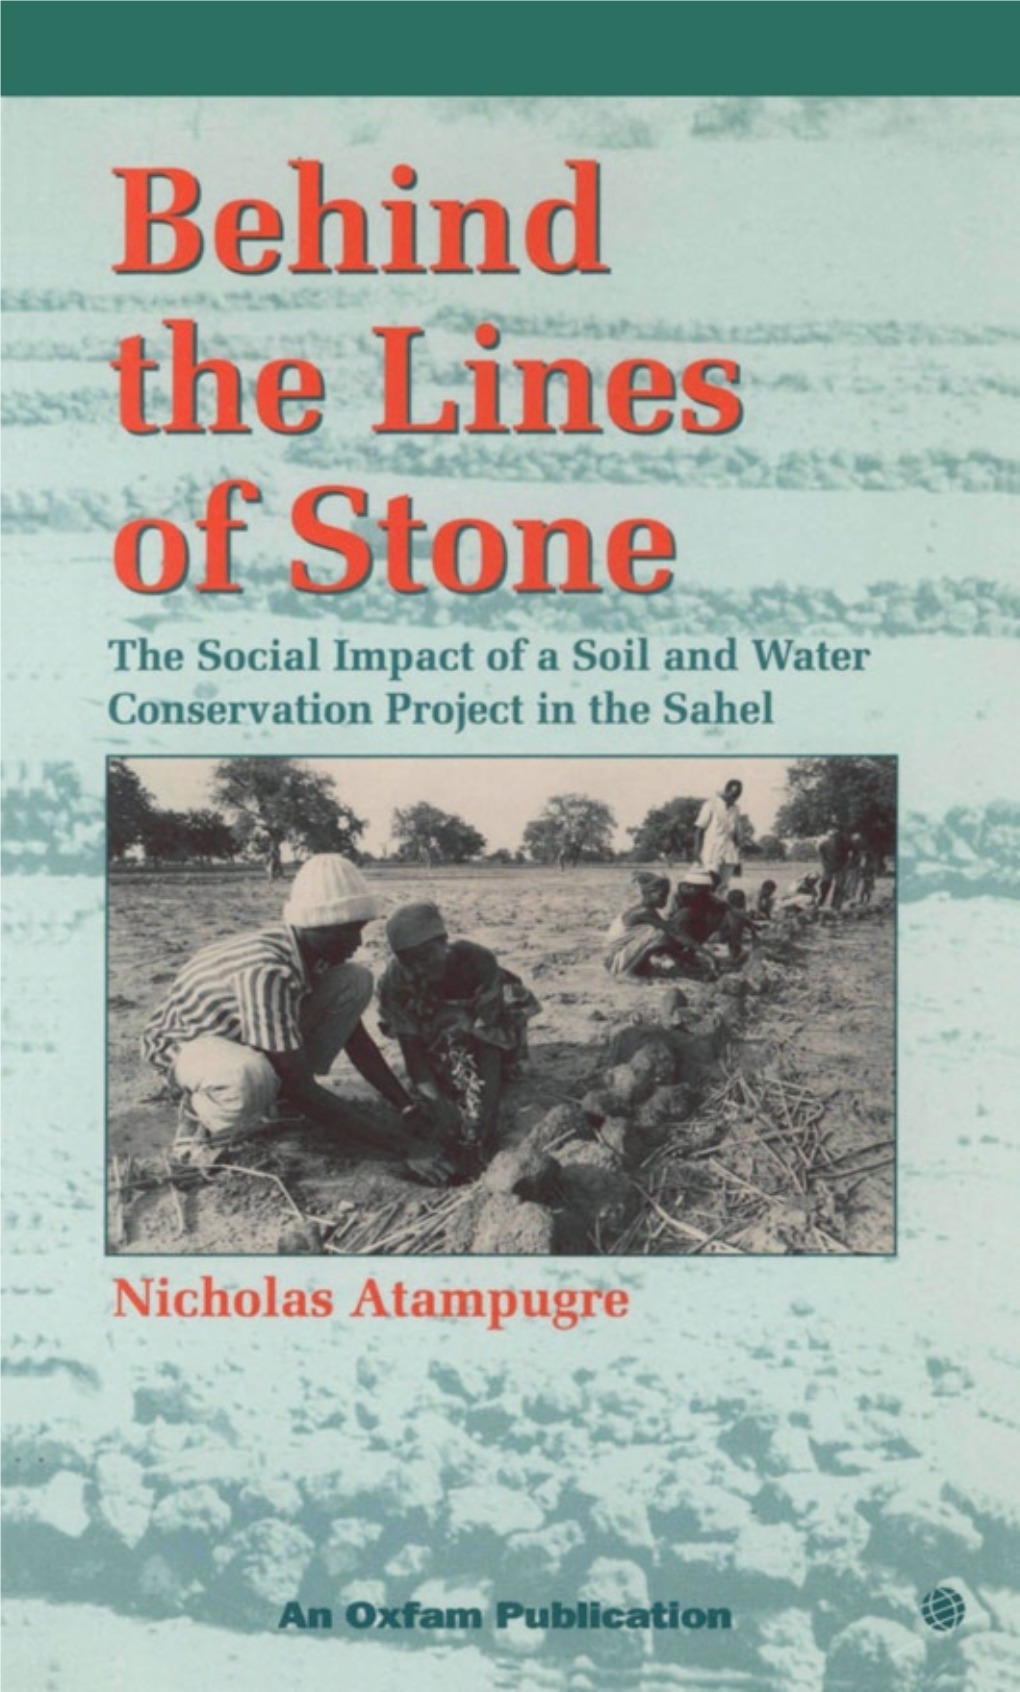 Behind the Lines of Stone: the Social Impact of a Soil and Water